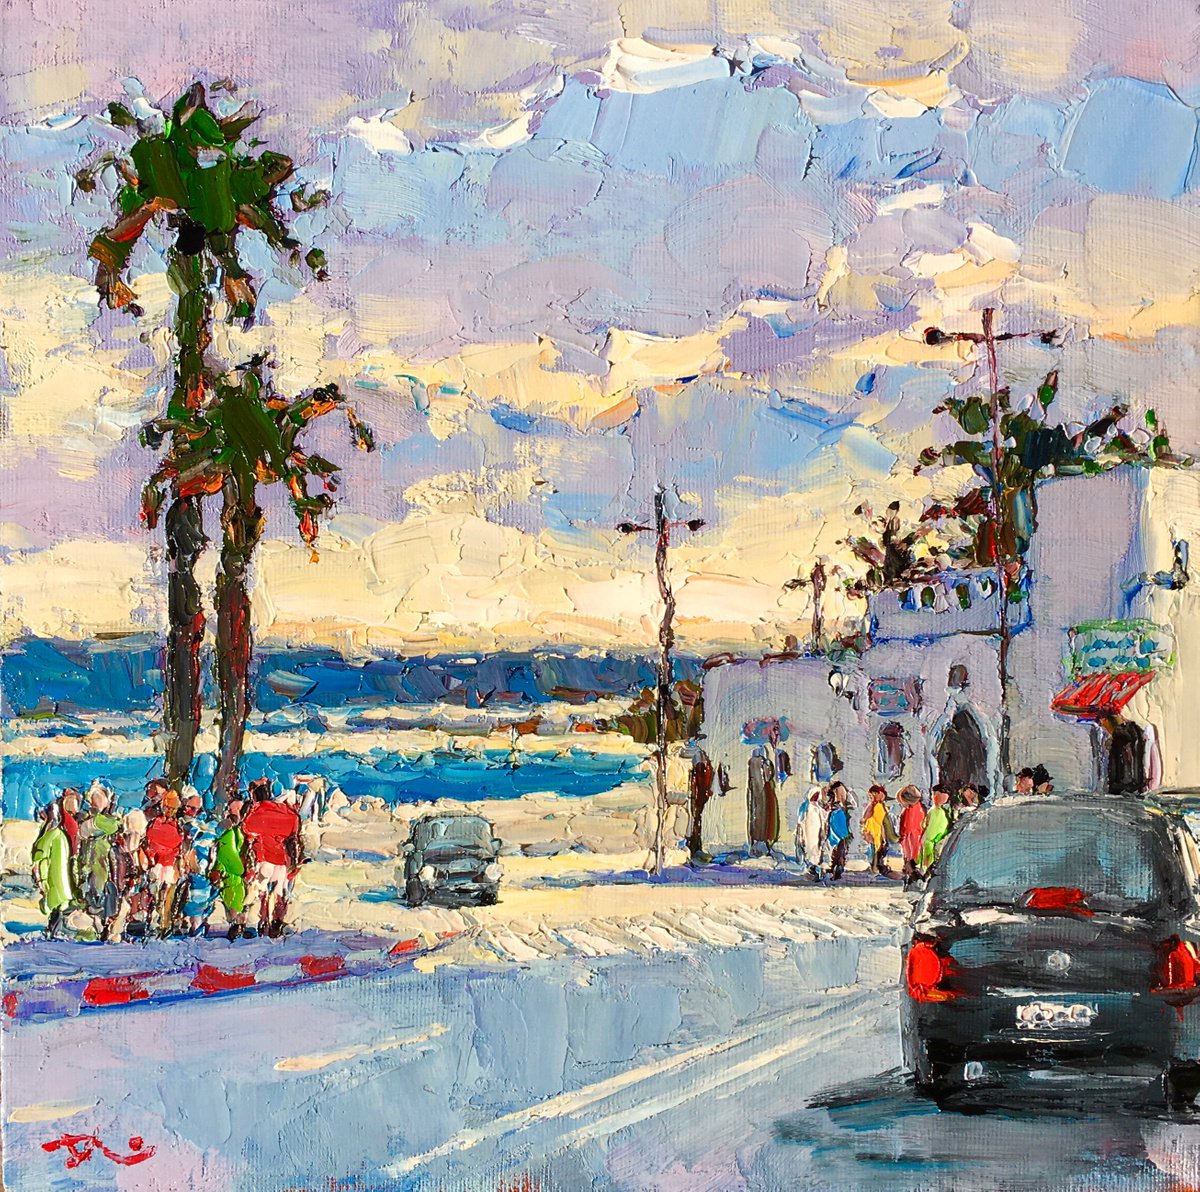 Morocco Series - Summer in Rabat by Dong Lin Zhang